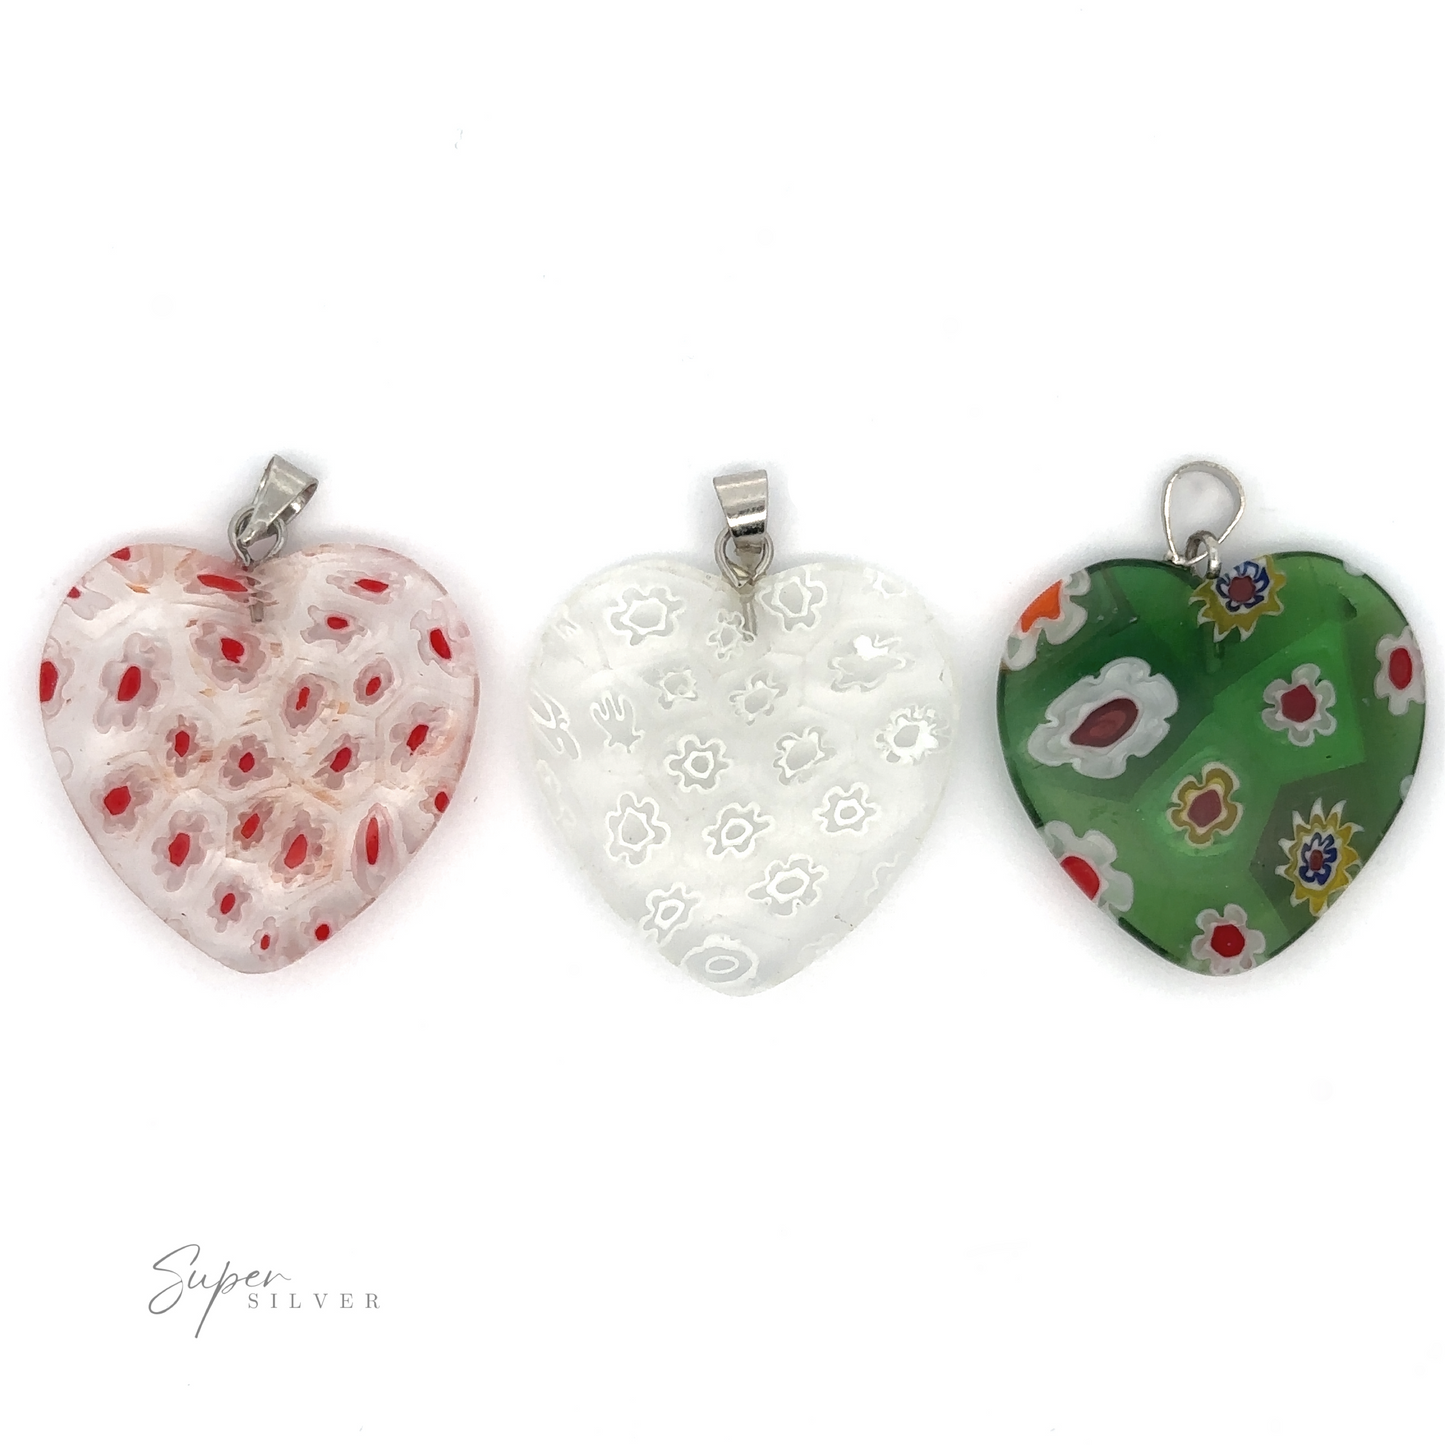 Three Heart Pendants with Flower Patterns are displayed side by side with intricate flower patterns in red, white, and green colors.